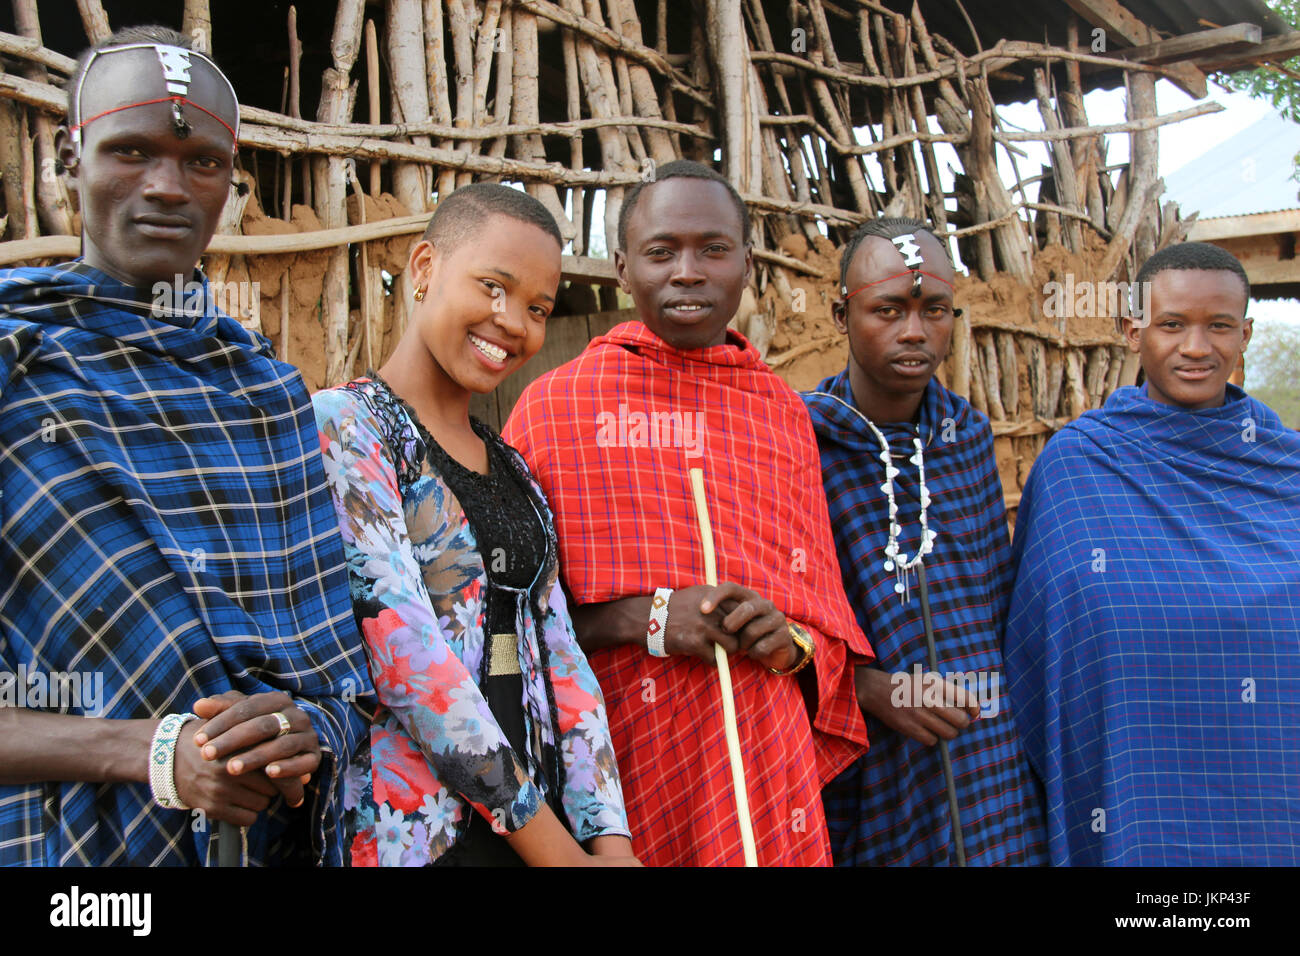 The 19 year old Ester (2-L) poses with traditionally dressed people in her native village of Majengo, near Arusha, Tanzania, 18 Juli 2017. Hundred-thousands of Germany have claimed sponsorship for a child in poorer countries. Unnoticed by the general public, these sponsorships have helped many children onto the road of success - Ester from Tanzania is only one example. Photo: Jürgen Bätz/dpa Stock Photo